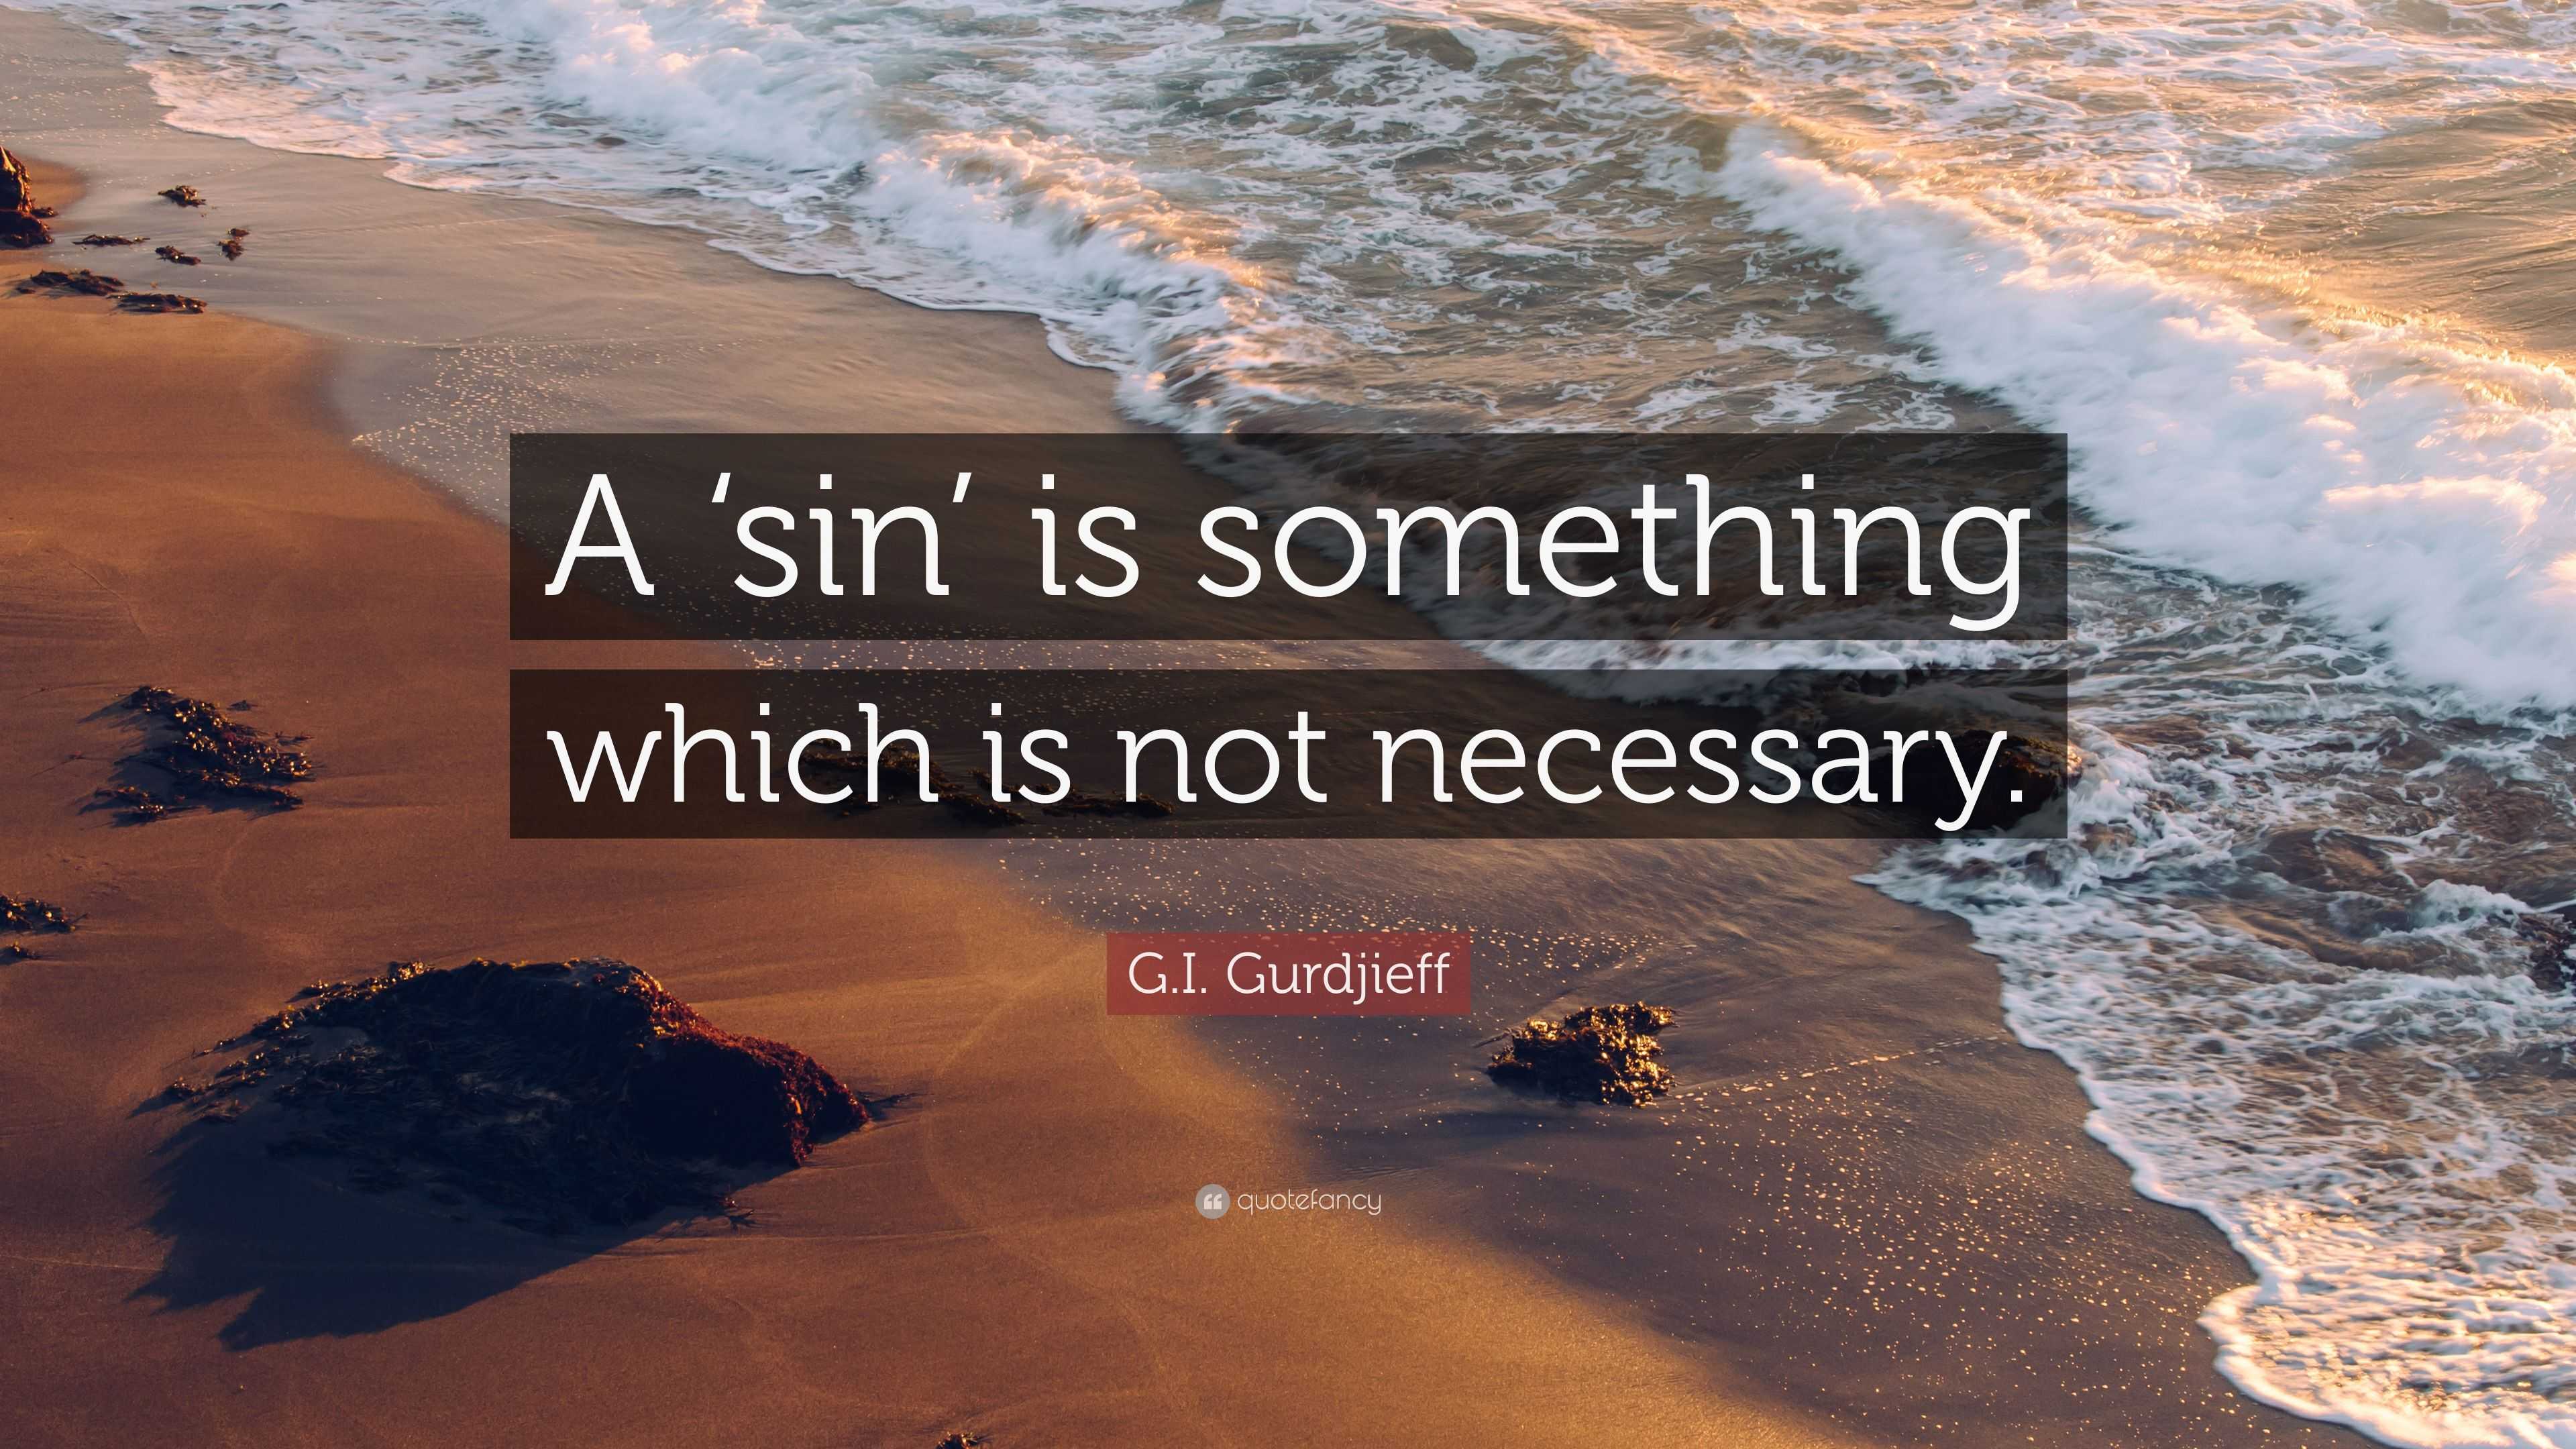 G.I. Gurdjieff Quote: “A ‘sin’ is something which is not necessary.”